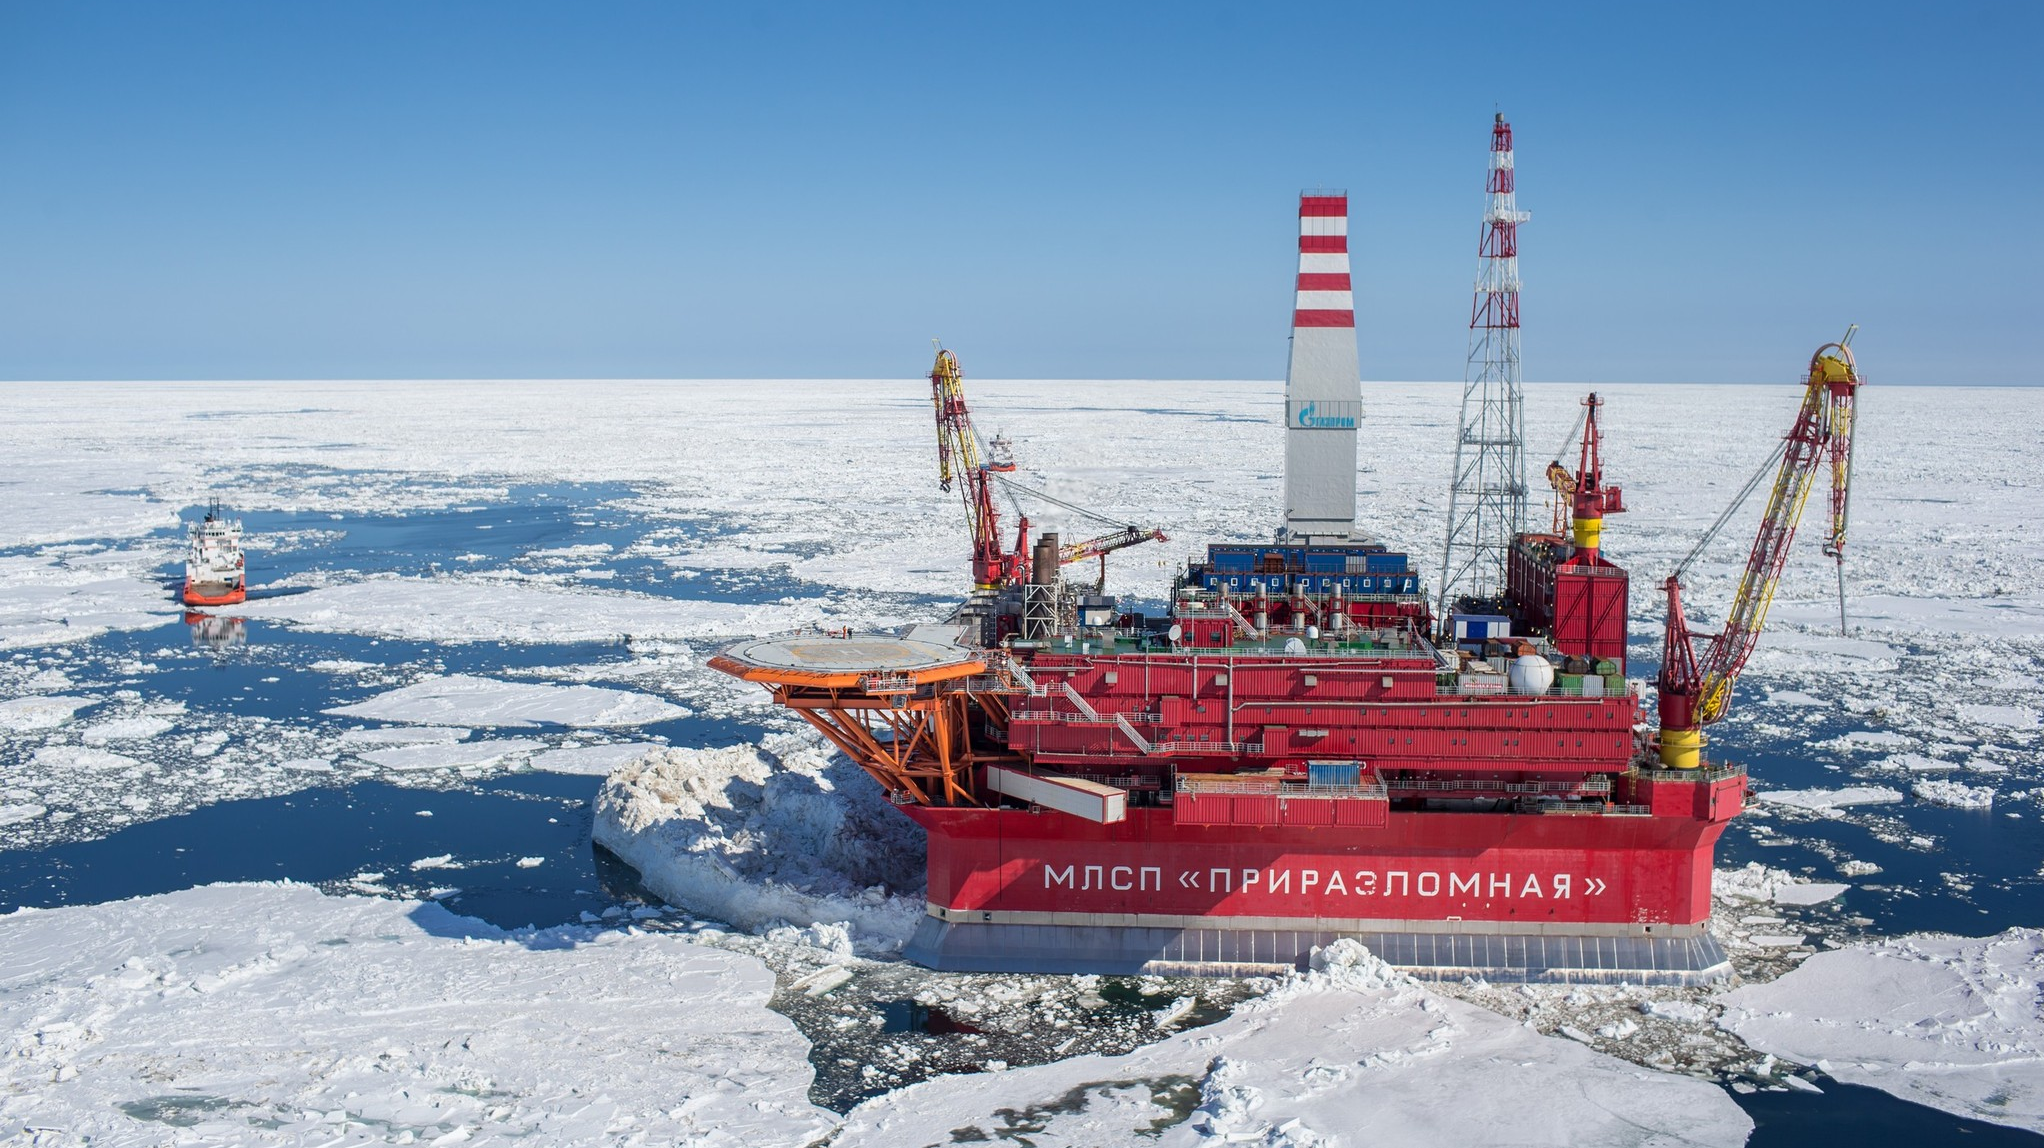 The government has approved incentives for projects in the Arctic